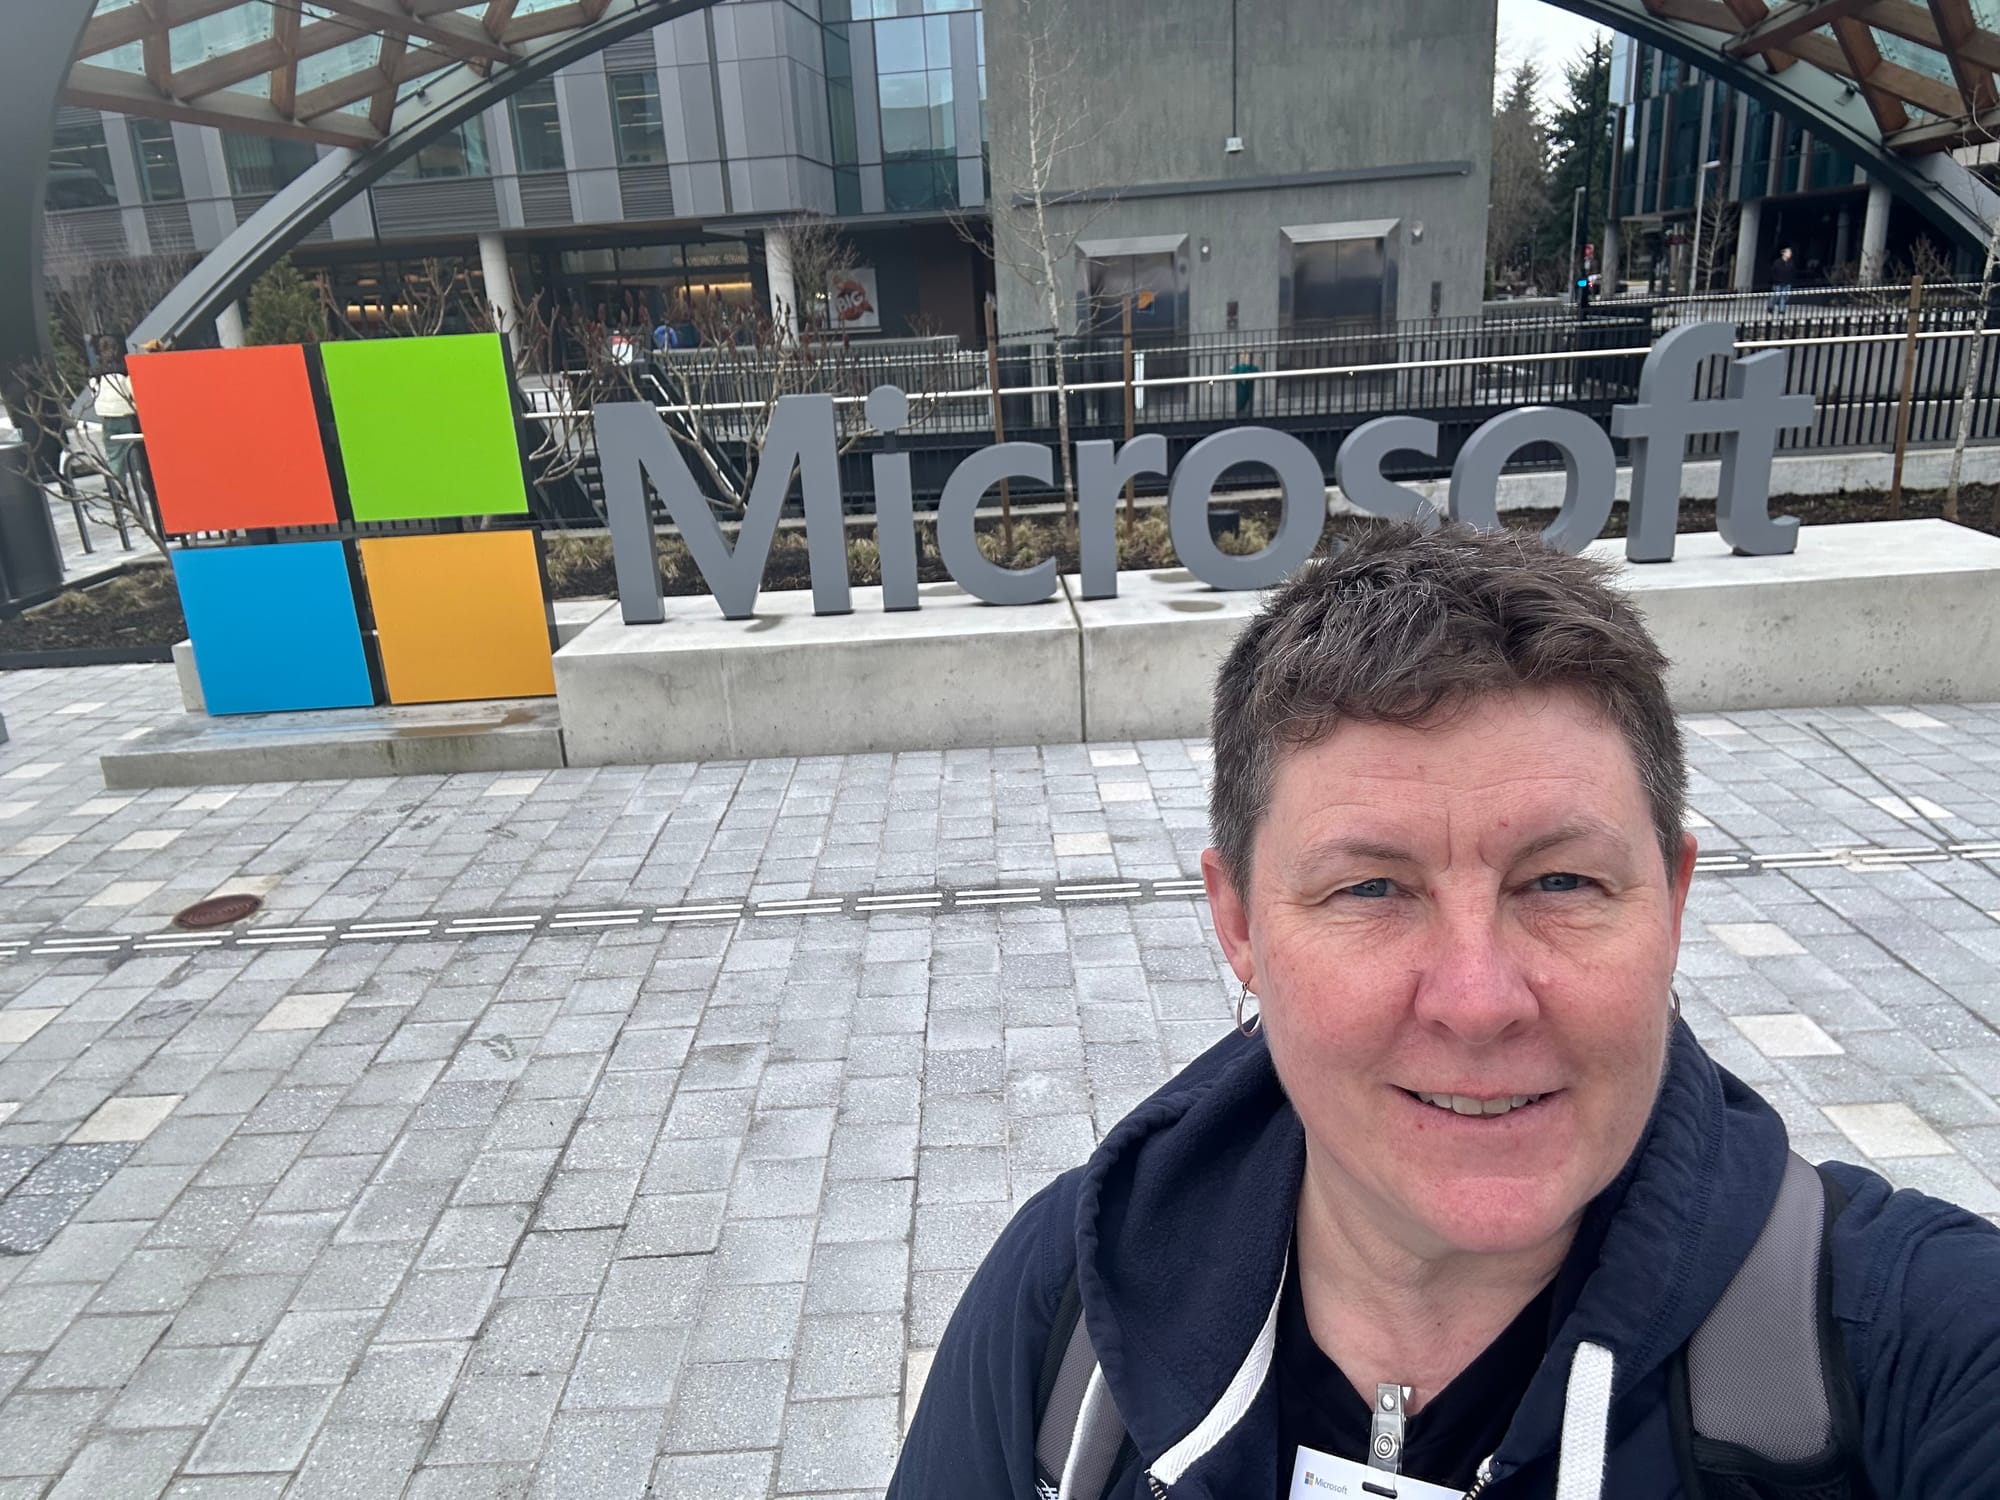 Selfie of me in a blue hooded sweatshirt, short brown hair, standing on a stone sidewalk in front of a Microsoft logo and sign.